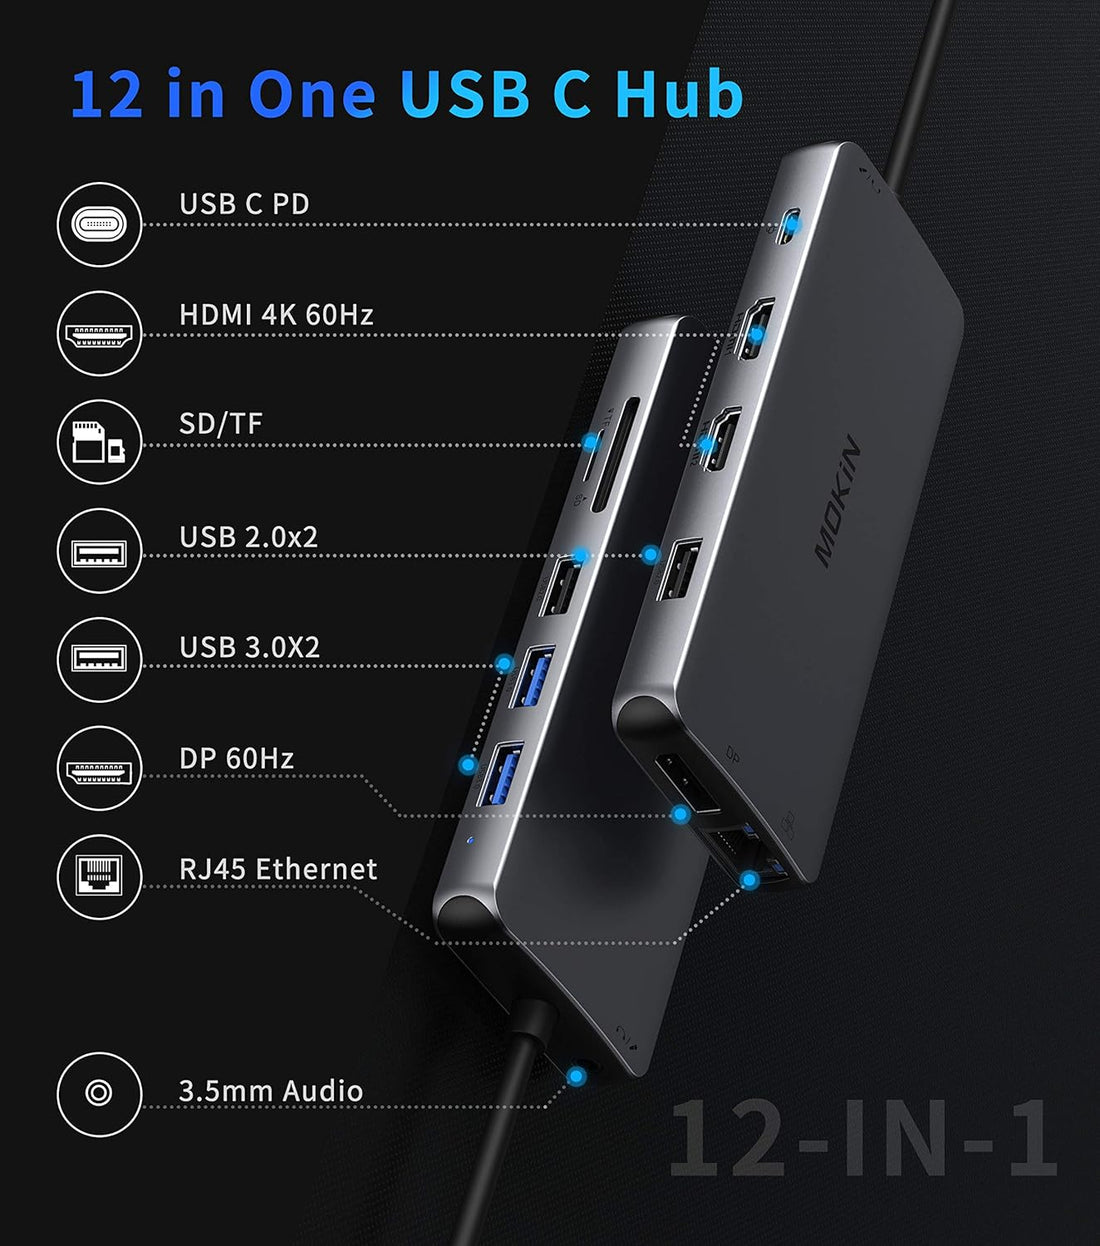 USB C Docking Station Dual Monitor,12 in 1 Triple Display Laptop Docking Station,Dual HDMI,DP Display,4 USB Port, Ethernet,PD,SD/TF, Audio Port Compatible for Dell, Lenovo,Surface USB-C Laptop